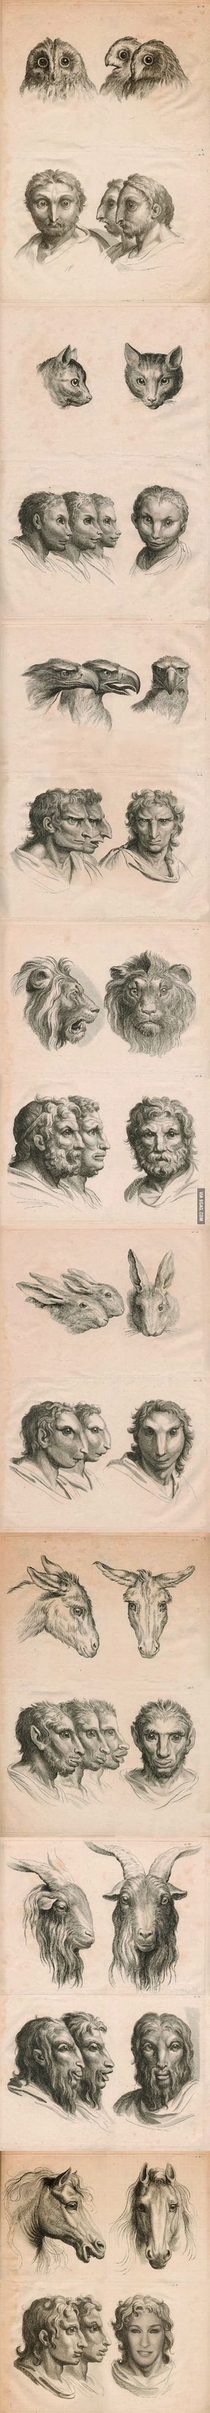 Pencil drawings of what humans would look like if they had evolved from different animal heritages other than apes Interesting work on possible races facial distinctions etc